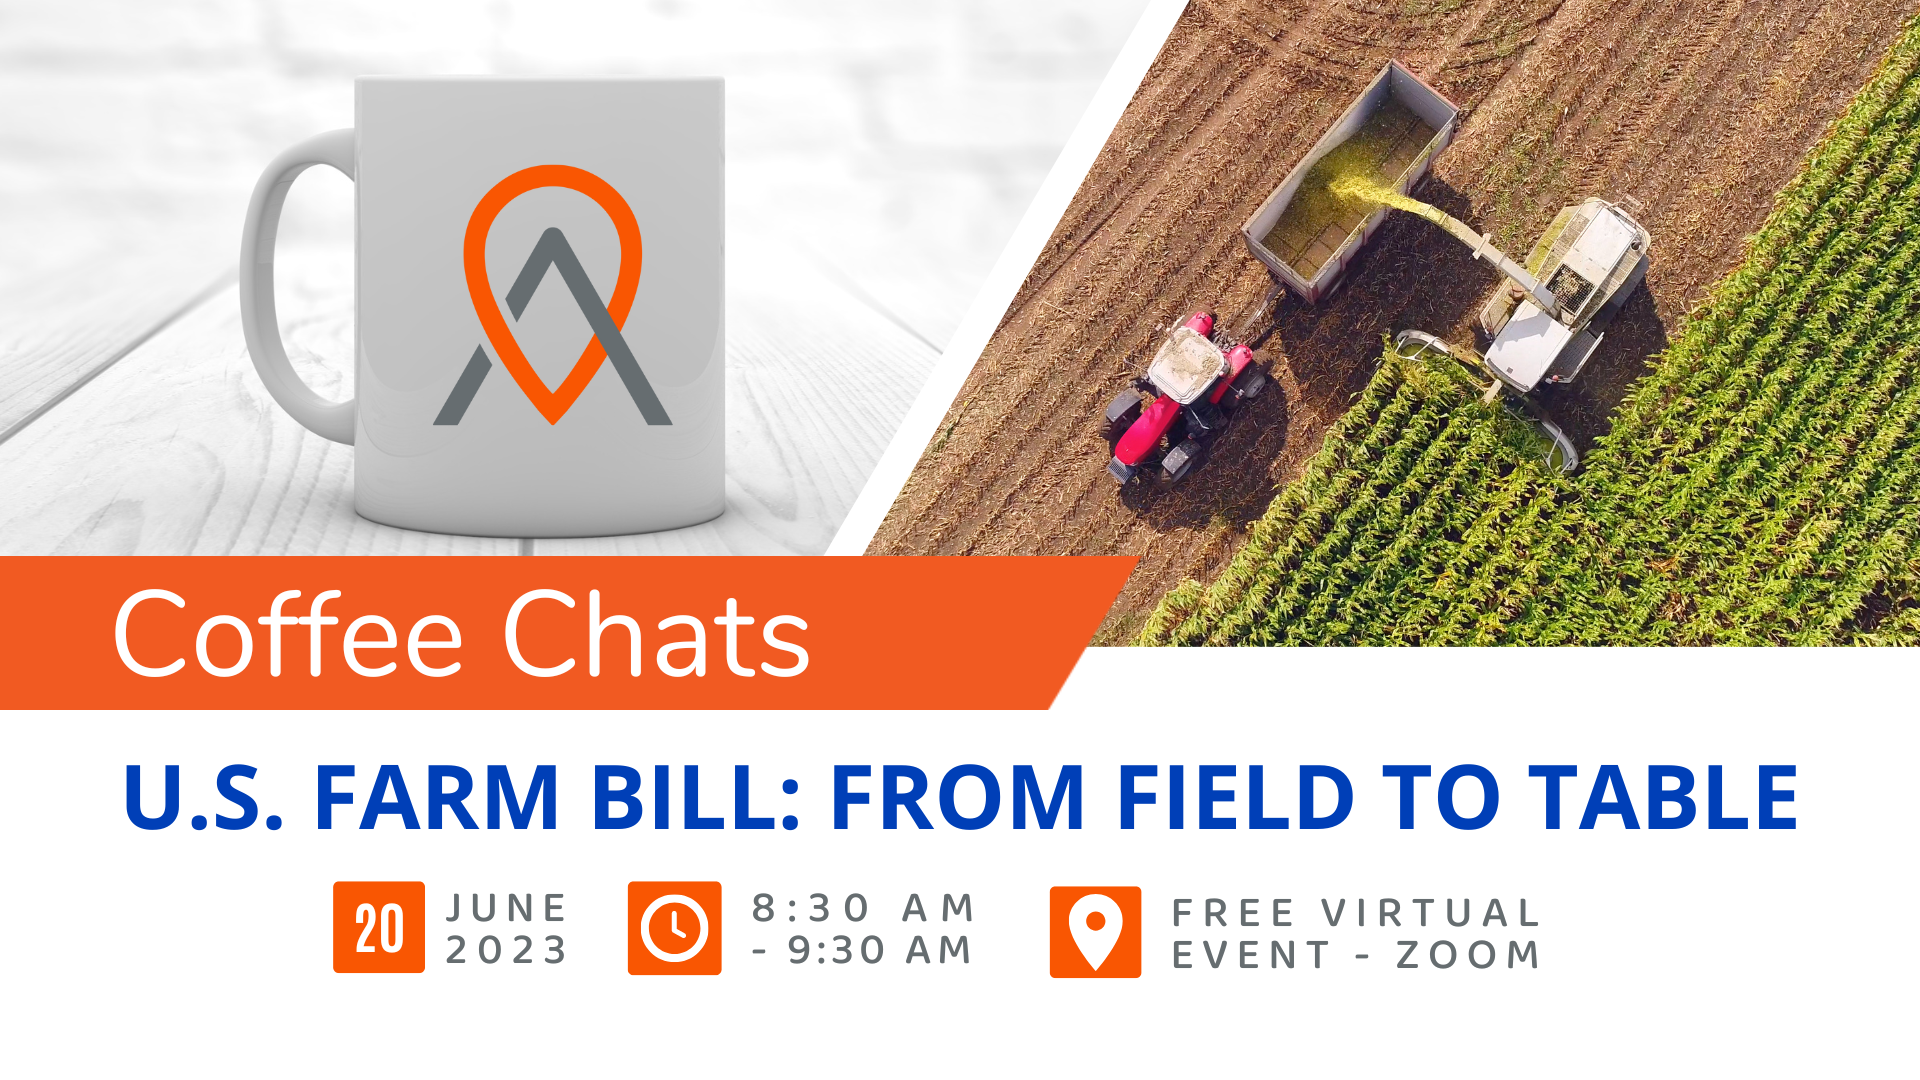 Event Promo Photo For Coffee Chats - U.S. Farm Bill: From Field to Table